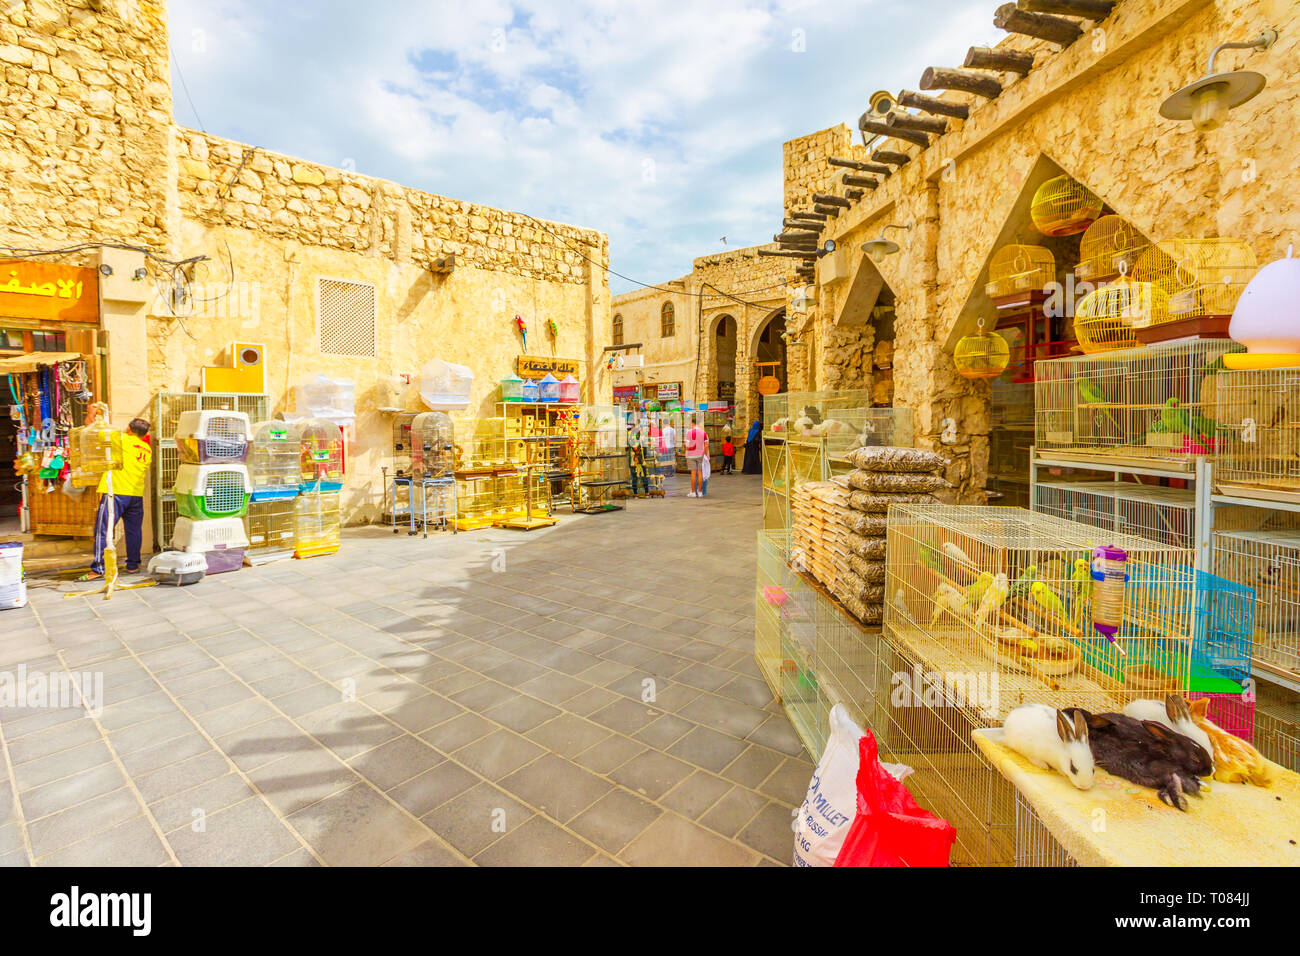 Doha, Qatar - February 19, 2019: rabbits, parrots, pet shop and cages at Bird Souq inside Souq Waqif, the animal market and popular tourist attraction Stock Photo